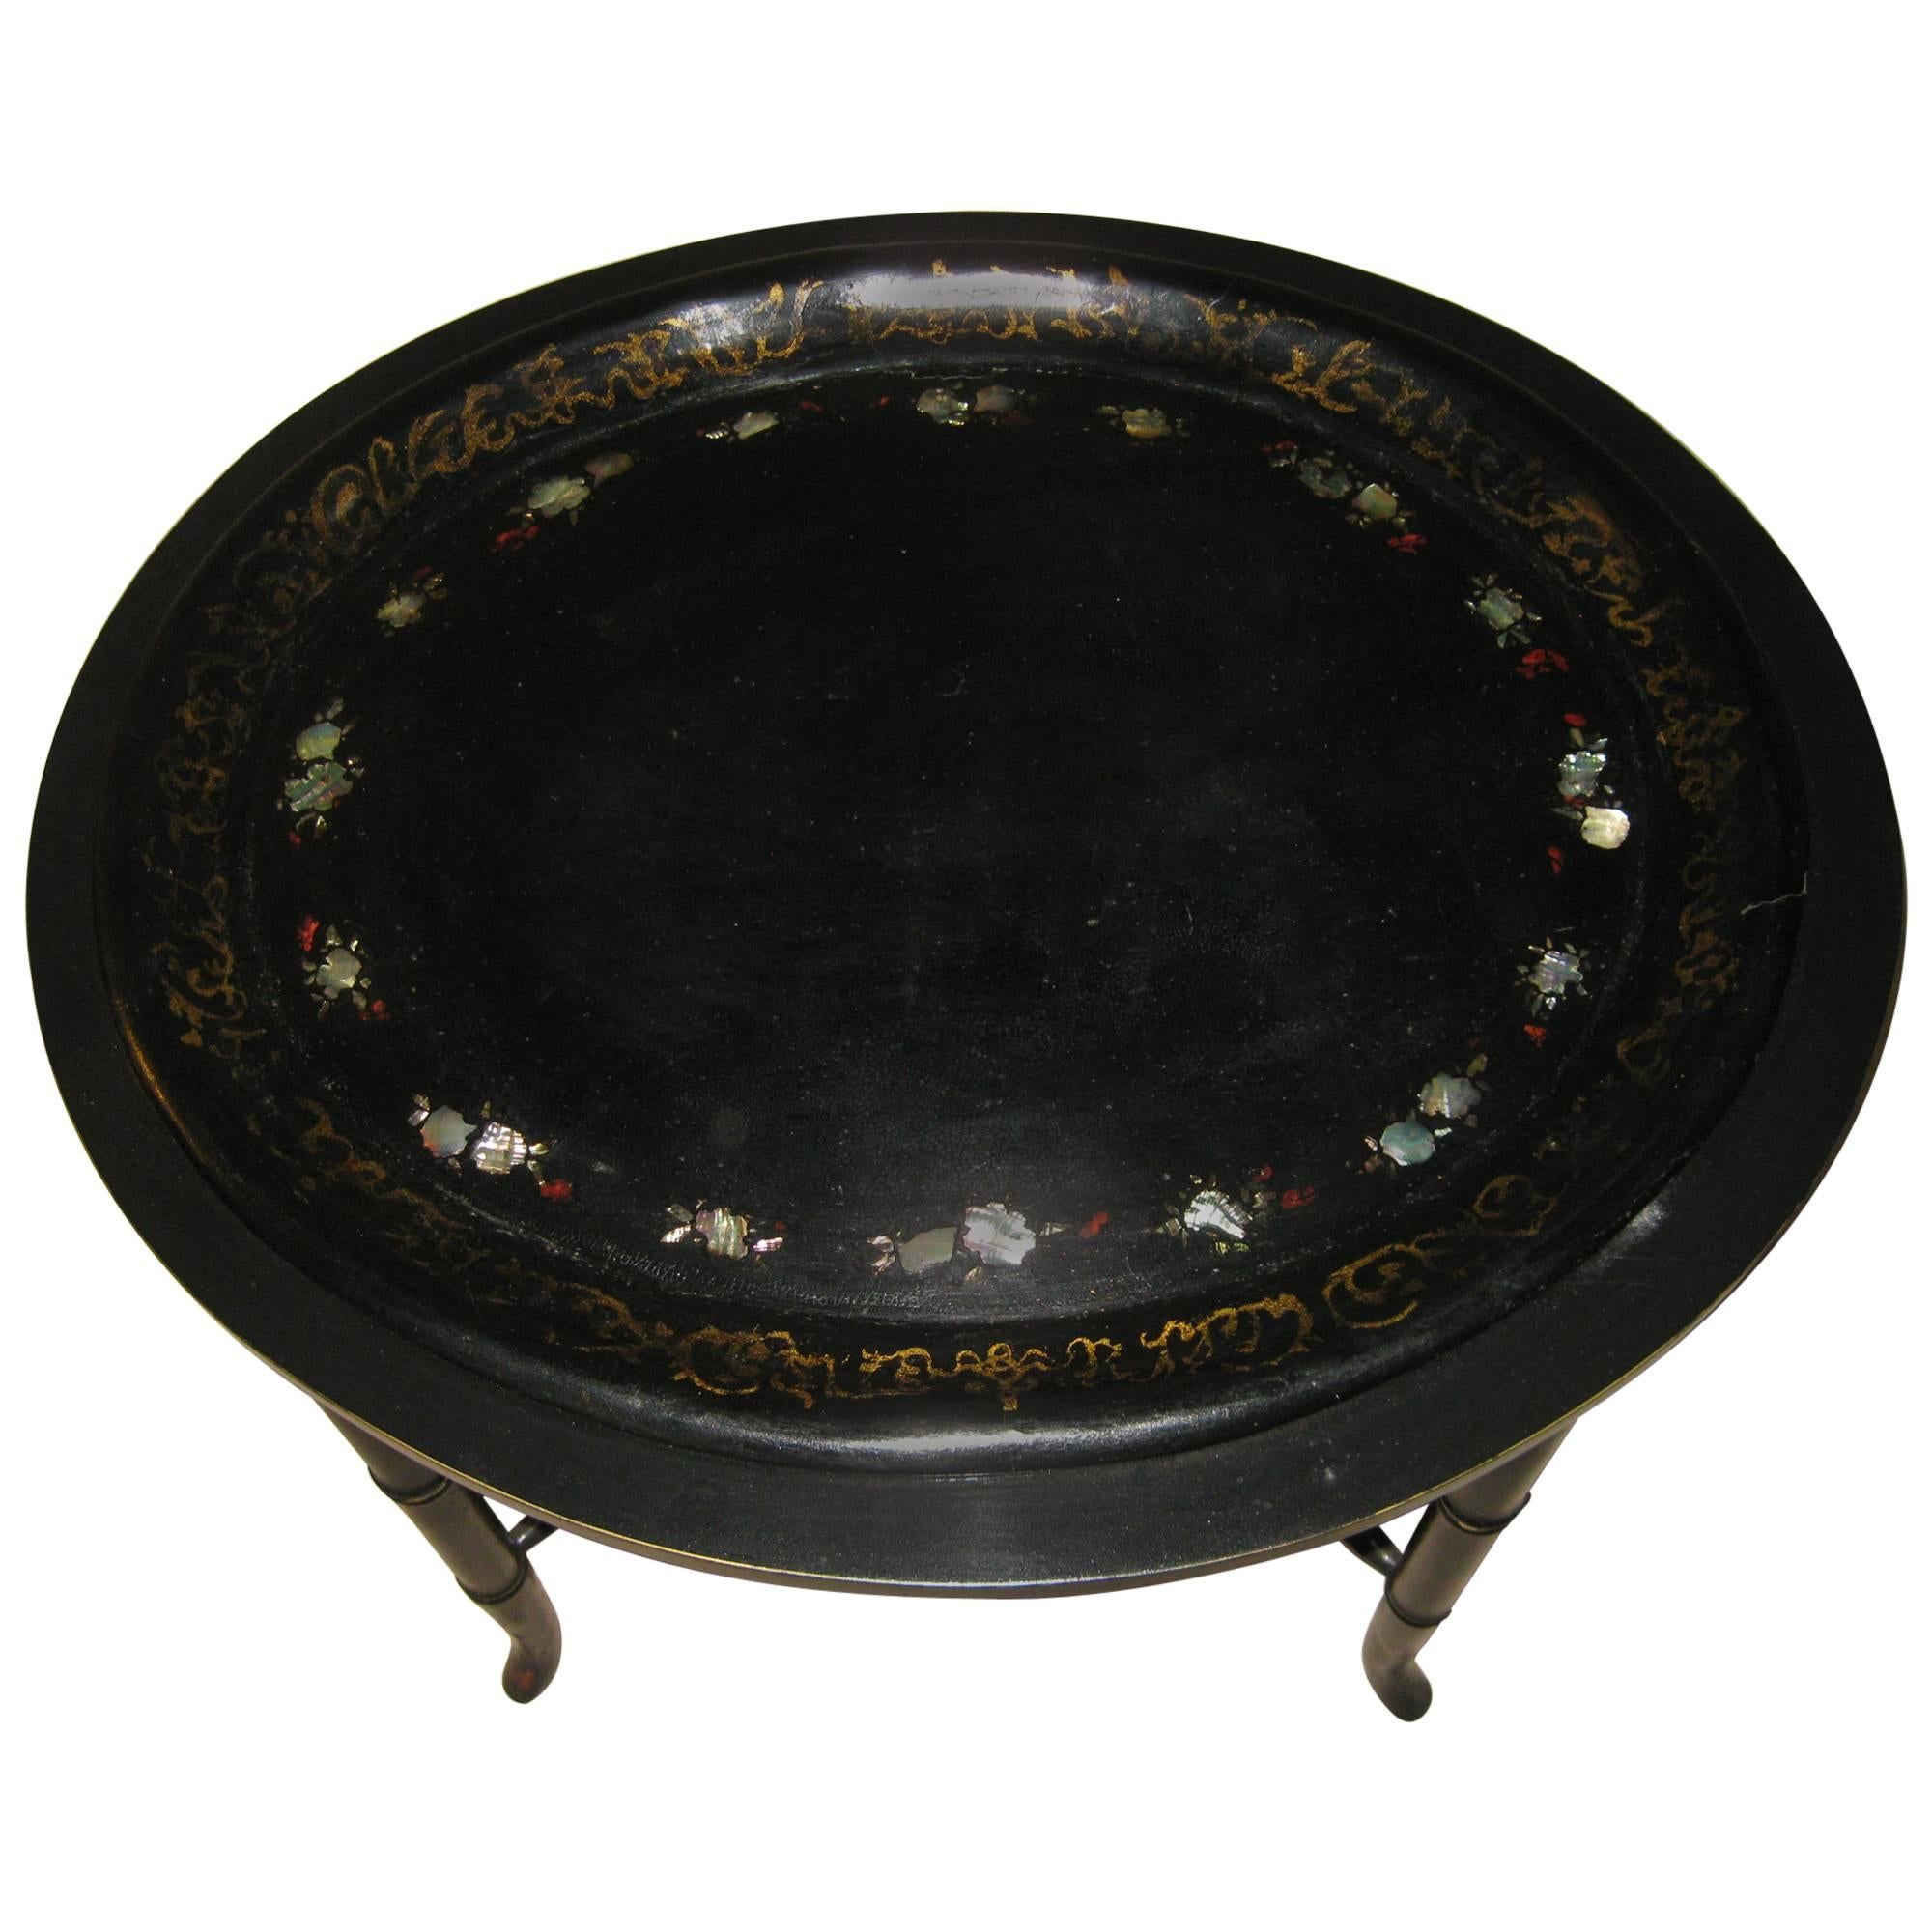 19th century English Black Lacquer and Gilt  Papier-Mache Tray on Stand